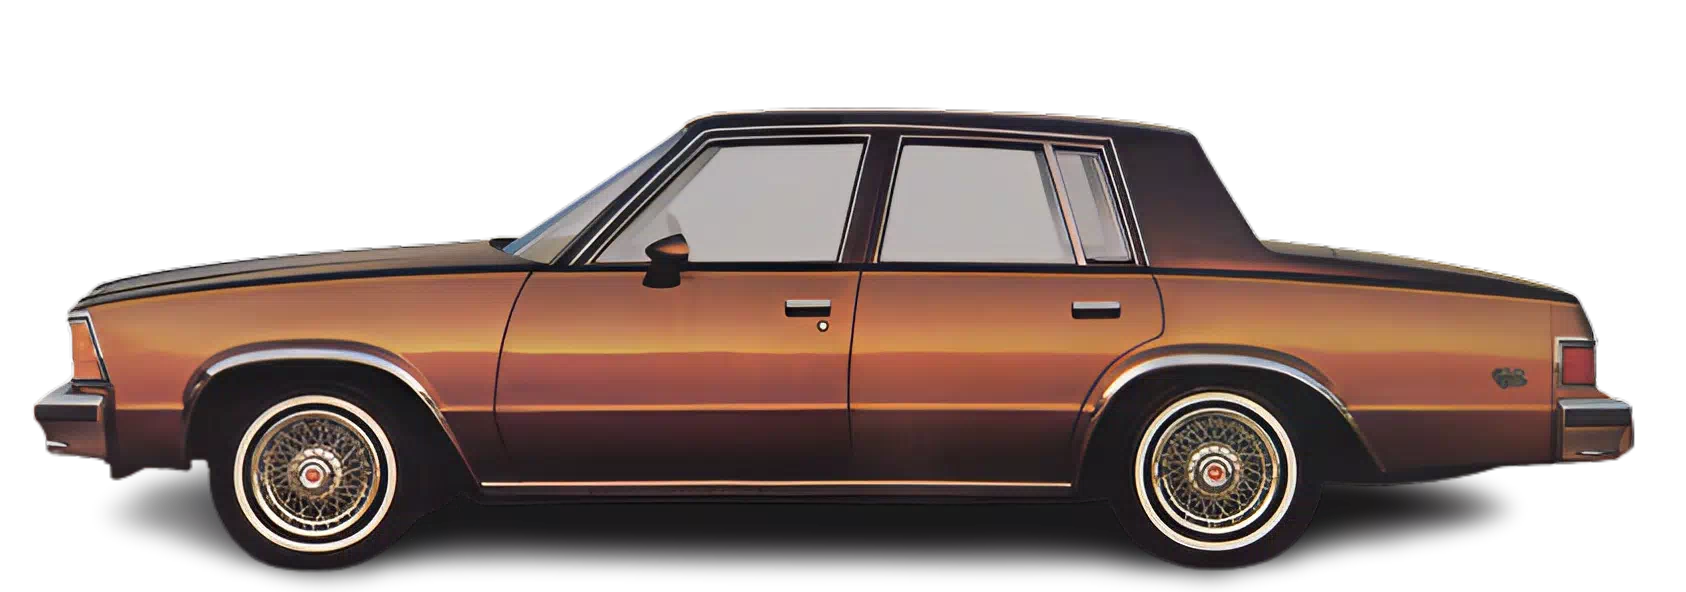 a image of a 1981 chevrolet malibu with a transparent background